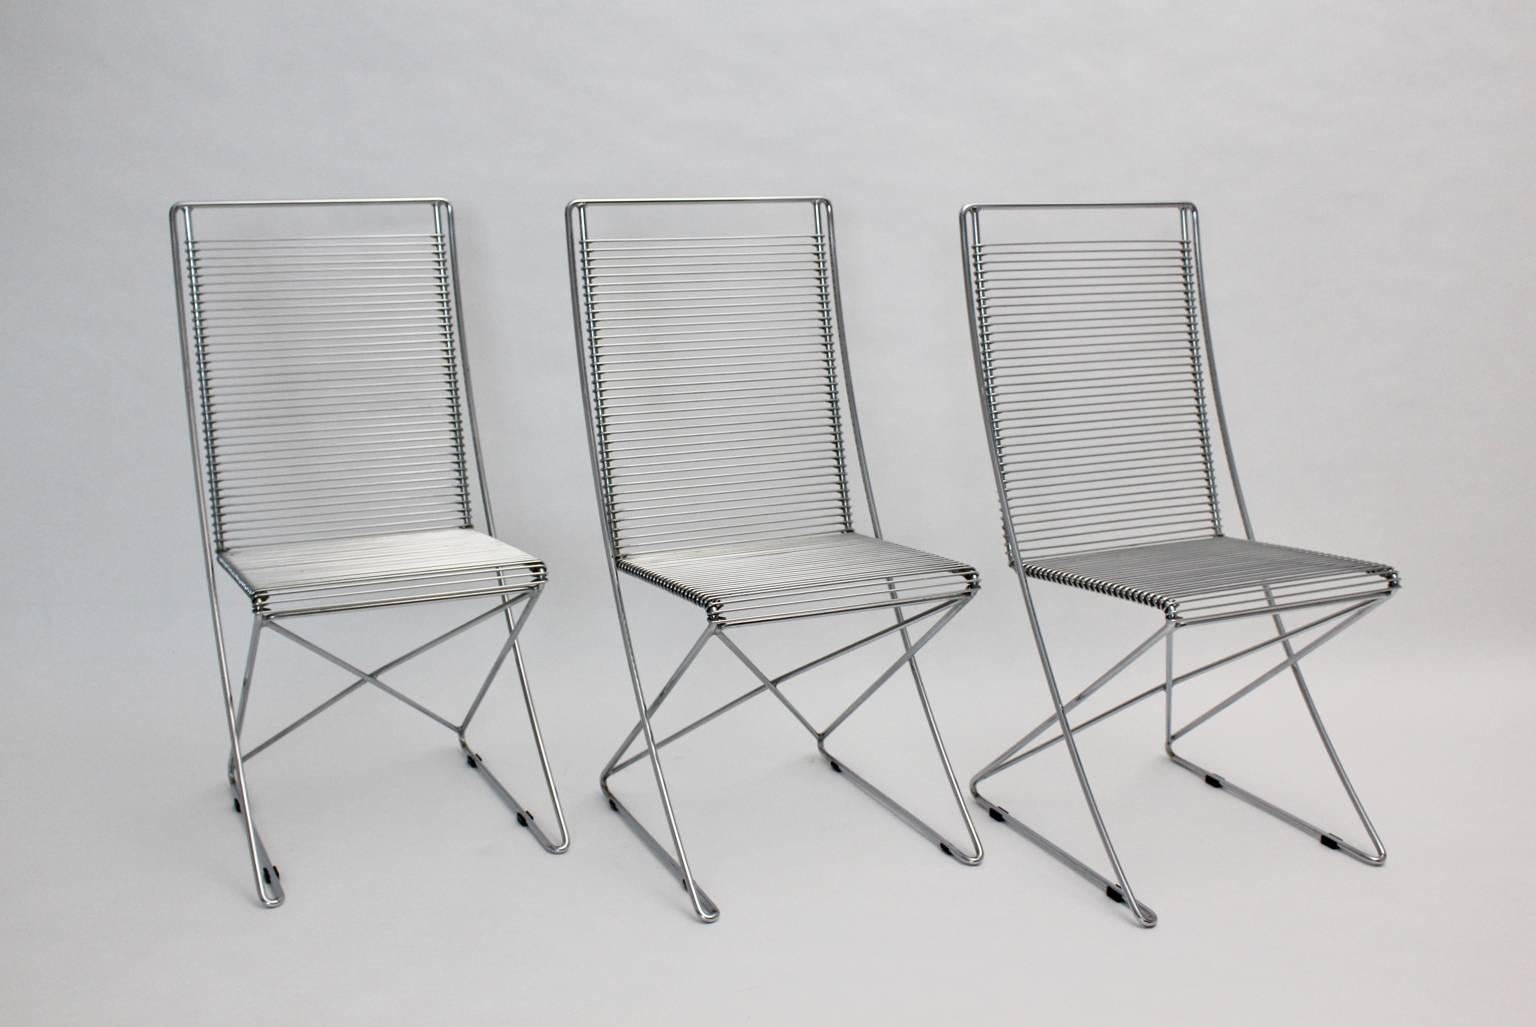 Postmodern vintage chairs, set of 3, from chromed steel wire in sculptural shape, model Kreuzschwinger.
The dining chairs are designed by Till Behrens 1983 Germany and produced by Schlubach, Grieben Brandenburg Germany
all measures are approximate
